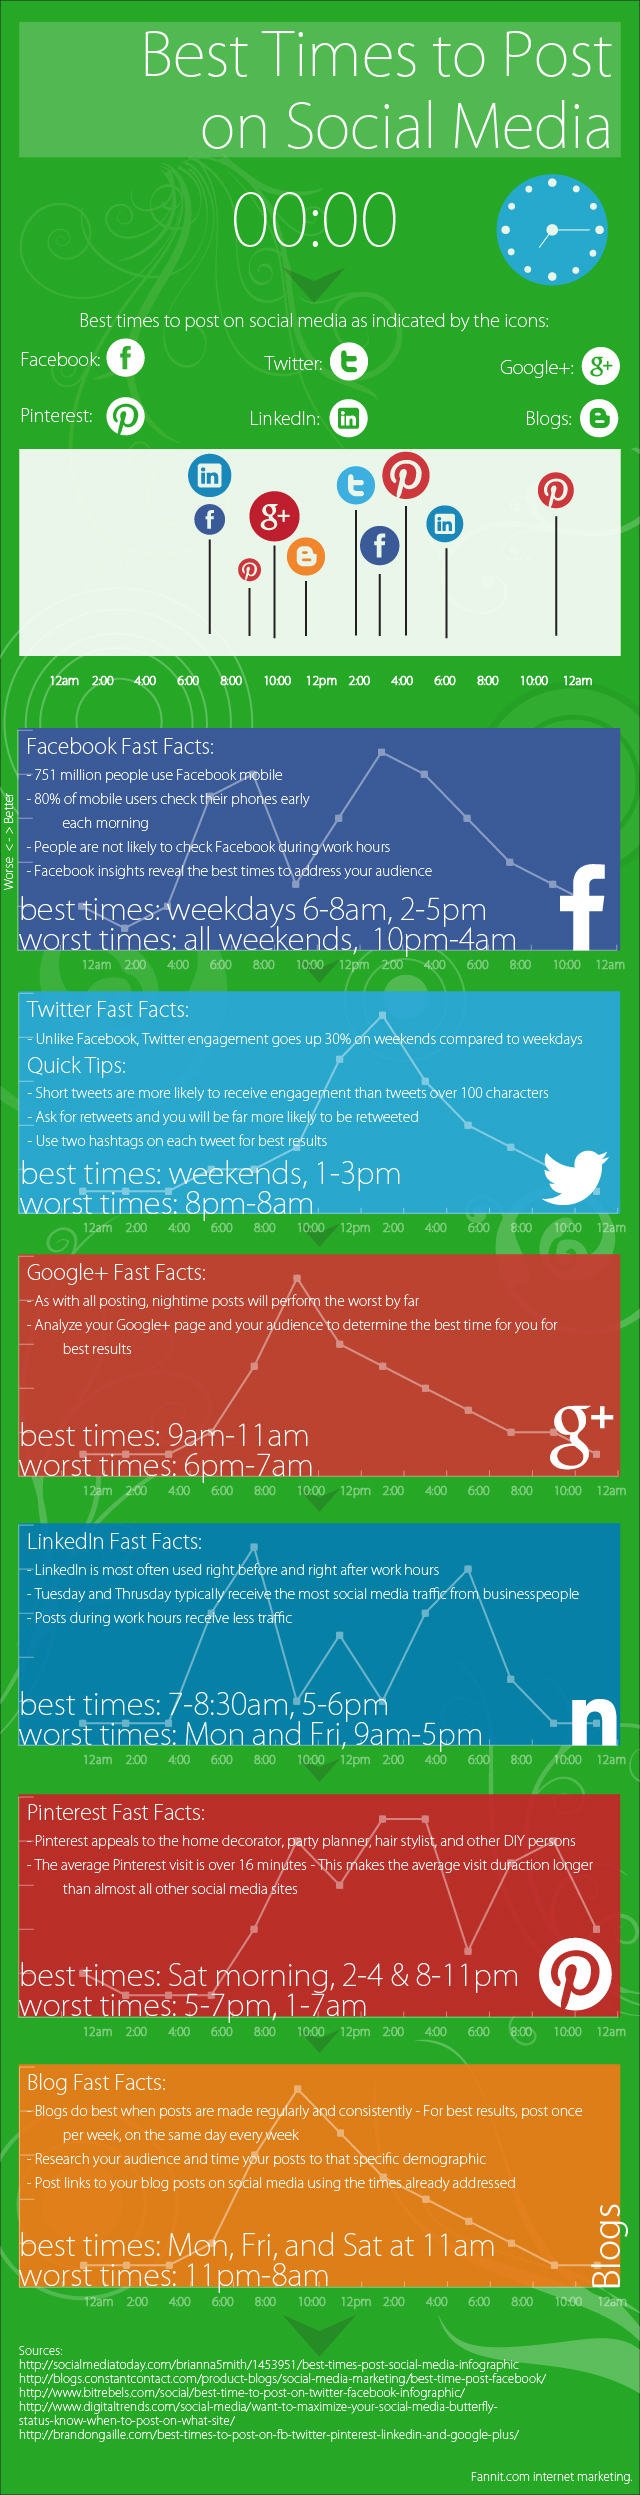 social-media-infographic-when-are-the-best-times-to-post (1)